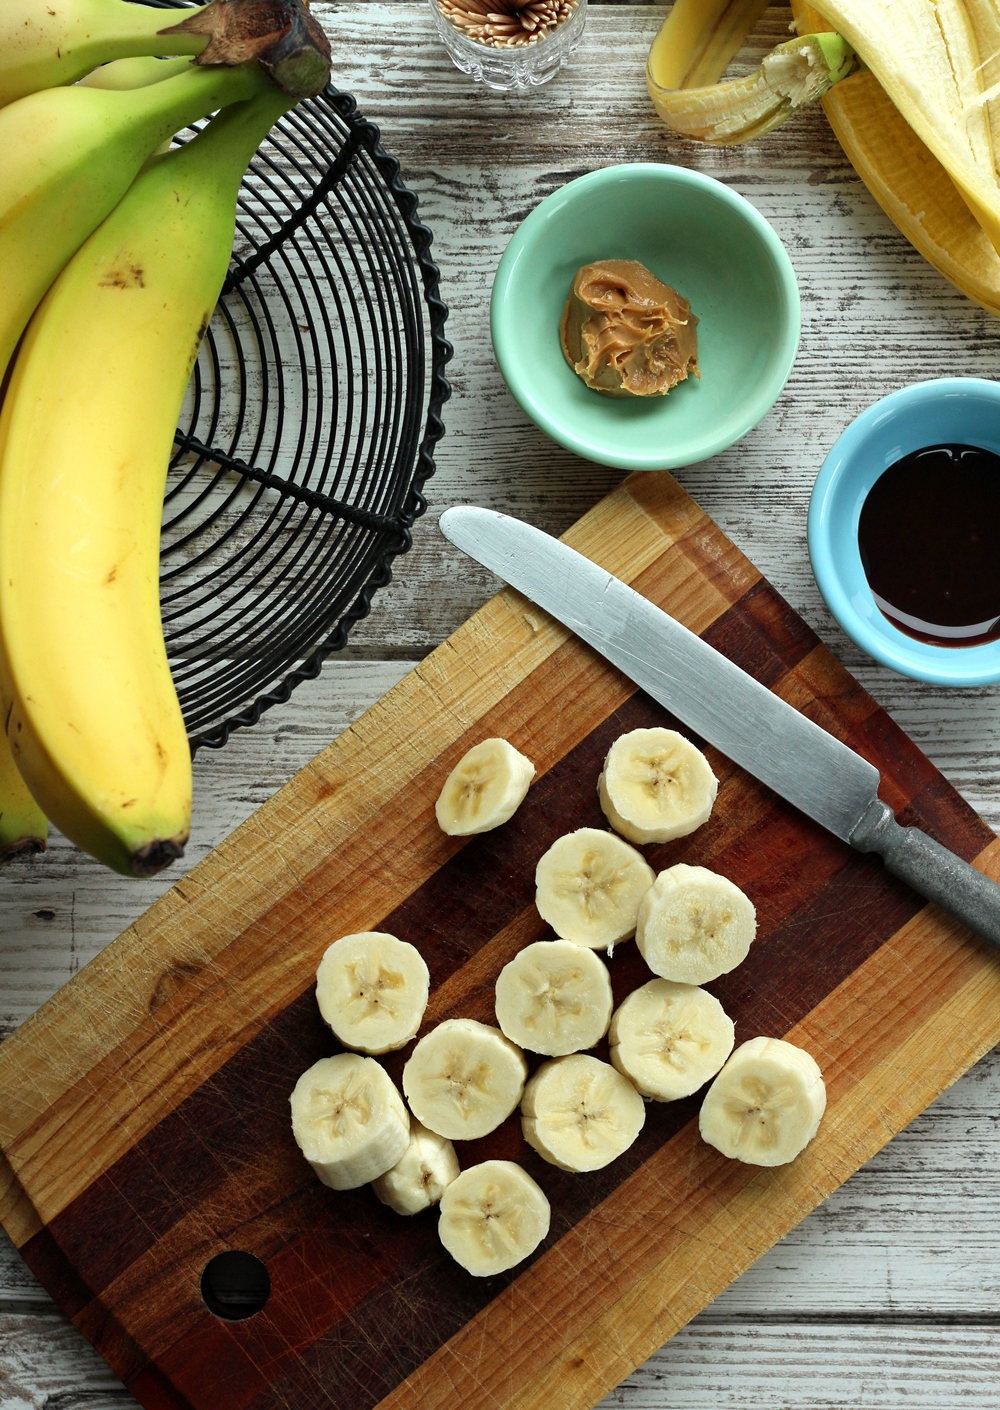 Banana slices on wooden cutting board